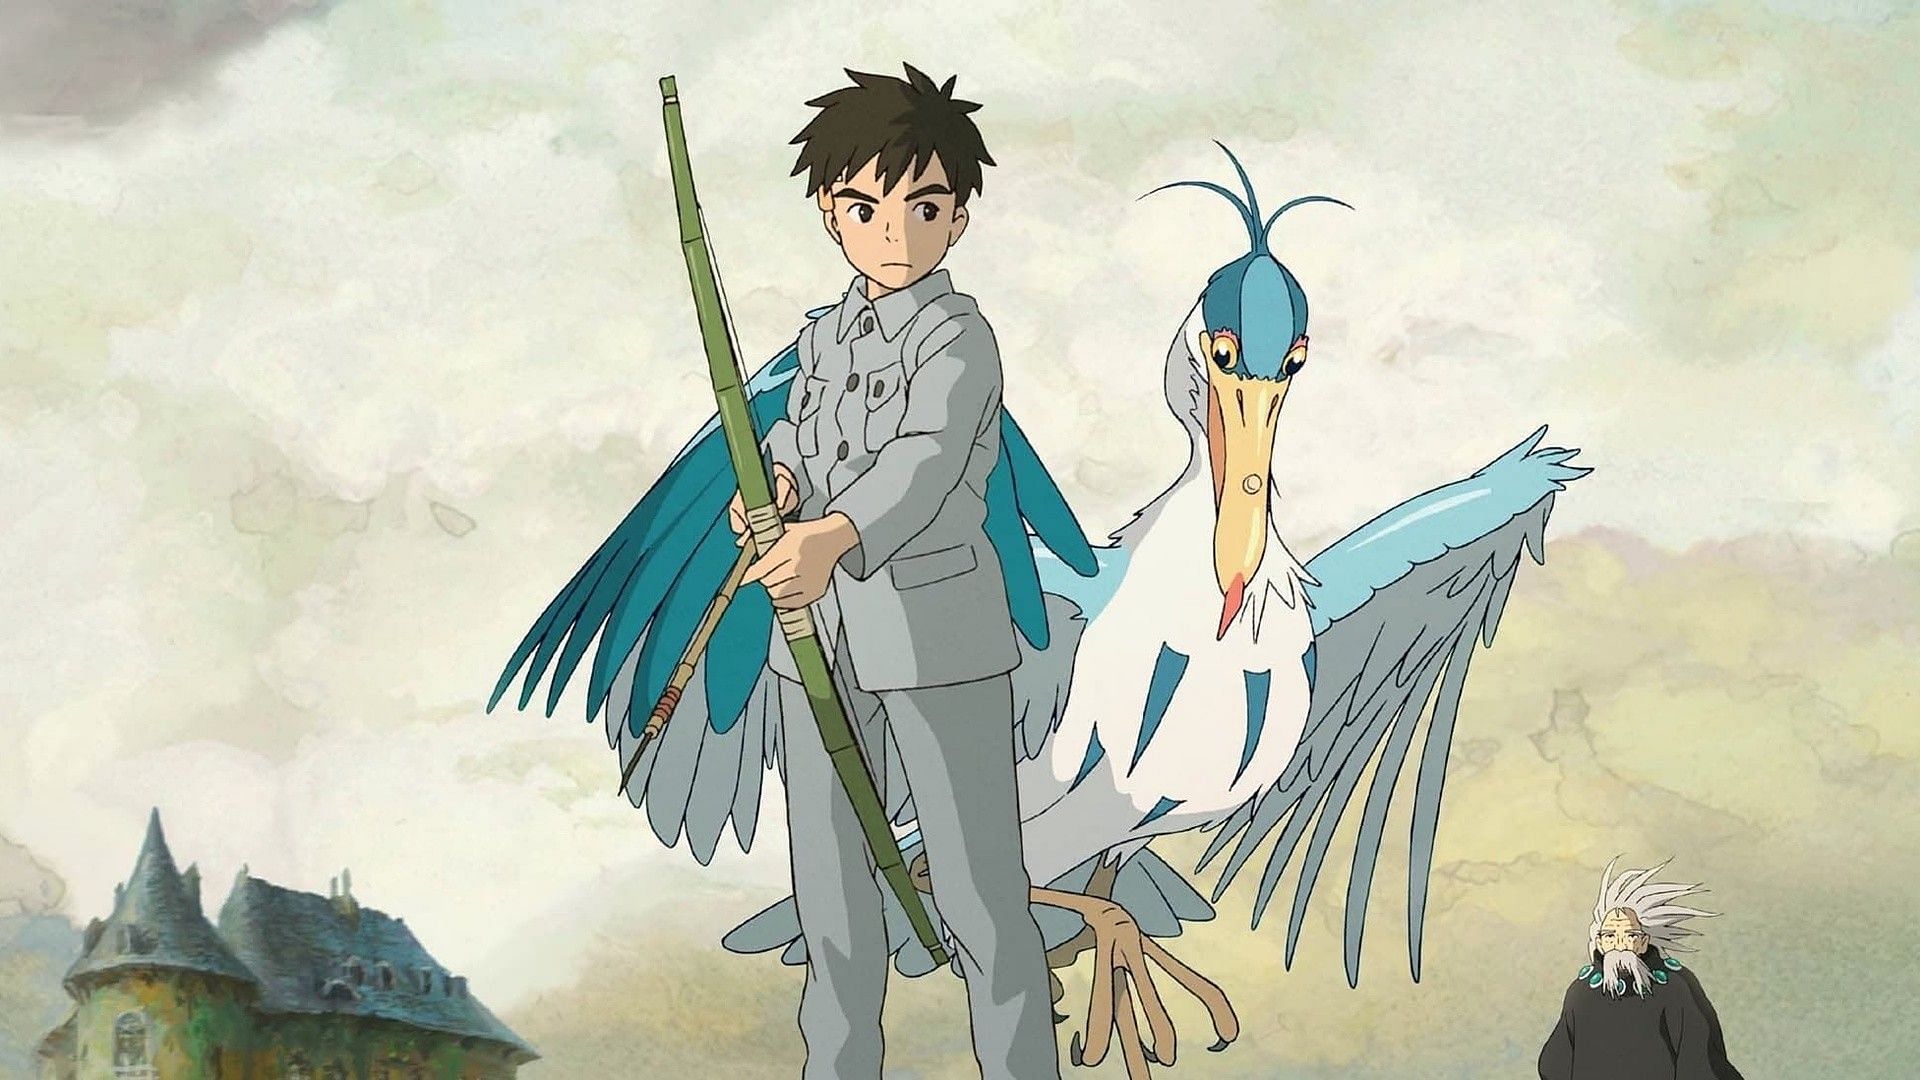 The Boy and the Heron and more nominated for Art Directors Guild Awards (Image via Studio Ghibli)